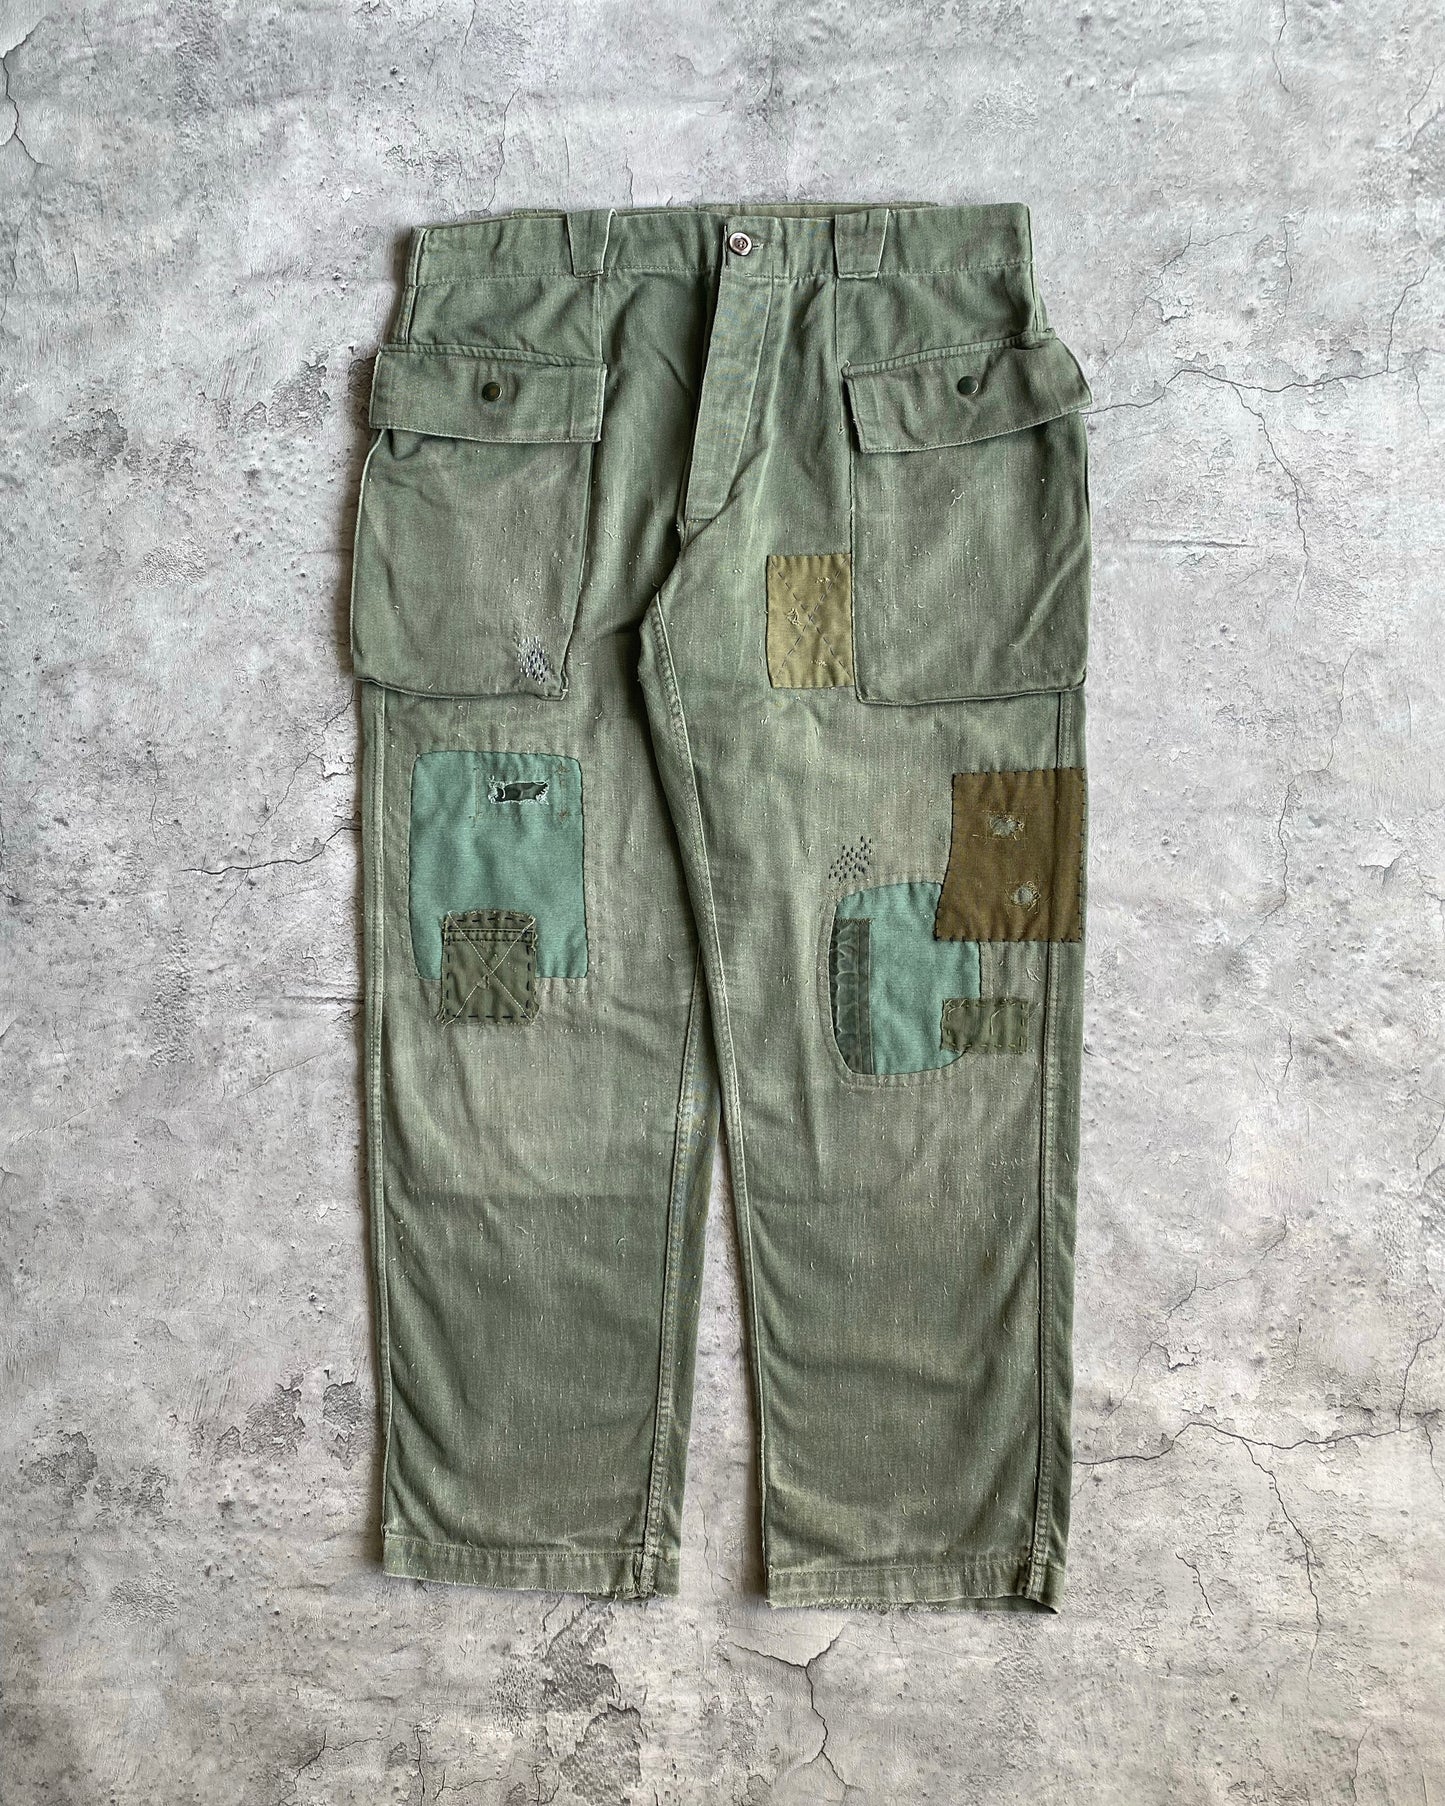 1970S FRANCE ARMY PATCHED WORK TROUSERS (36x28)